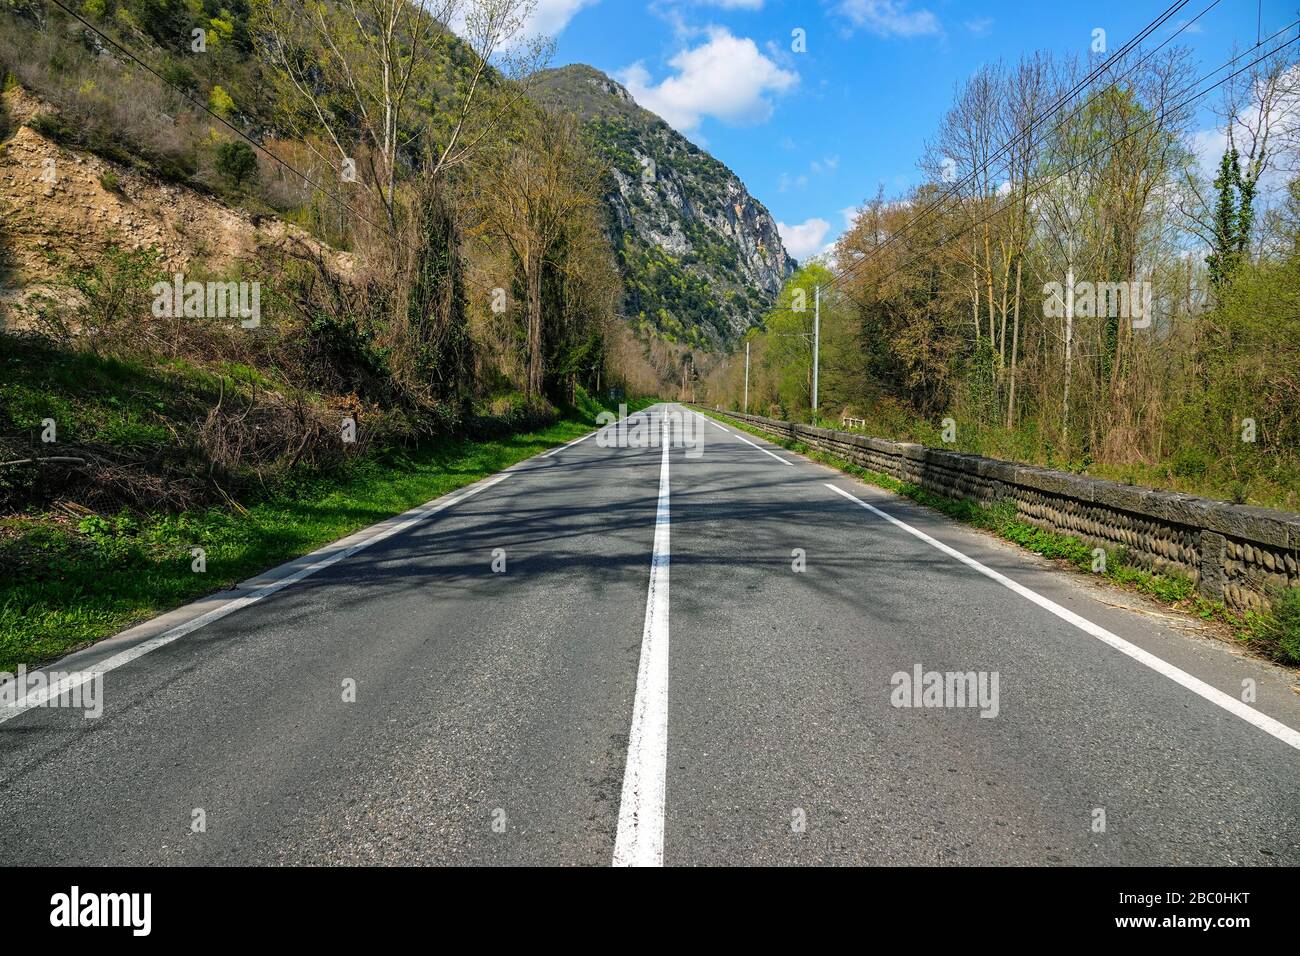 Empty road during coronavirus lockdown, Ornolac, Ussat les Bains, Ariege, French Pyrenees, France Stock Photo